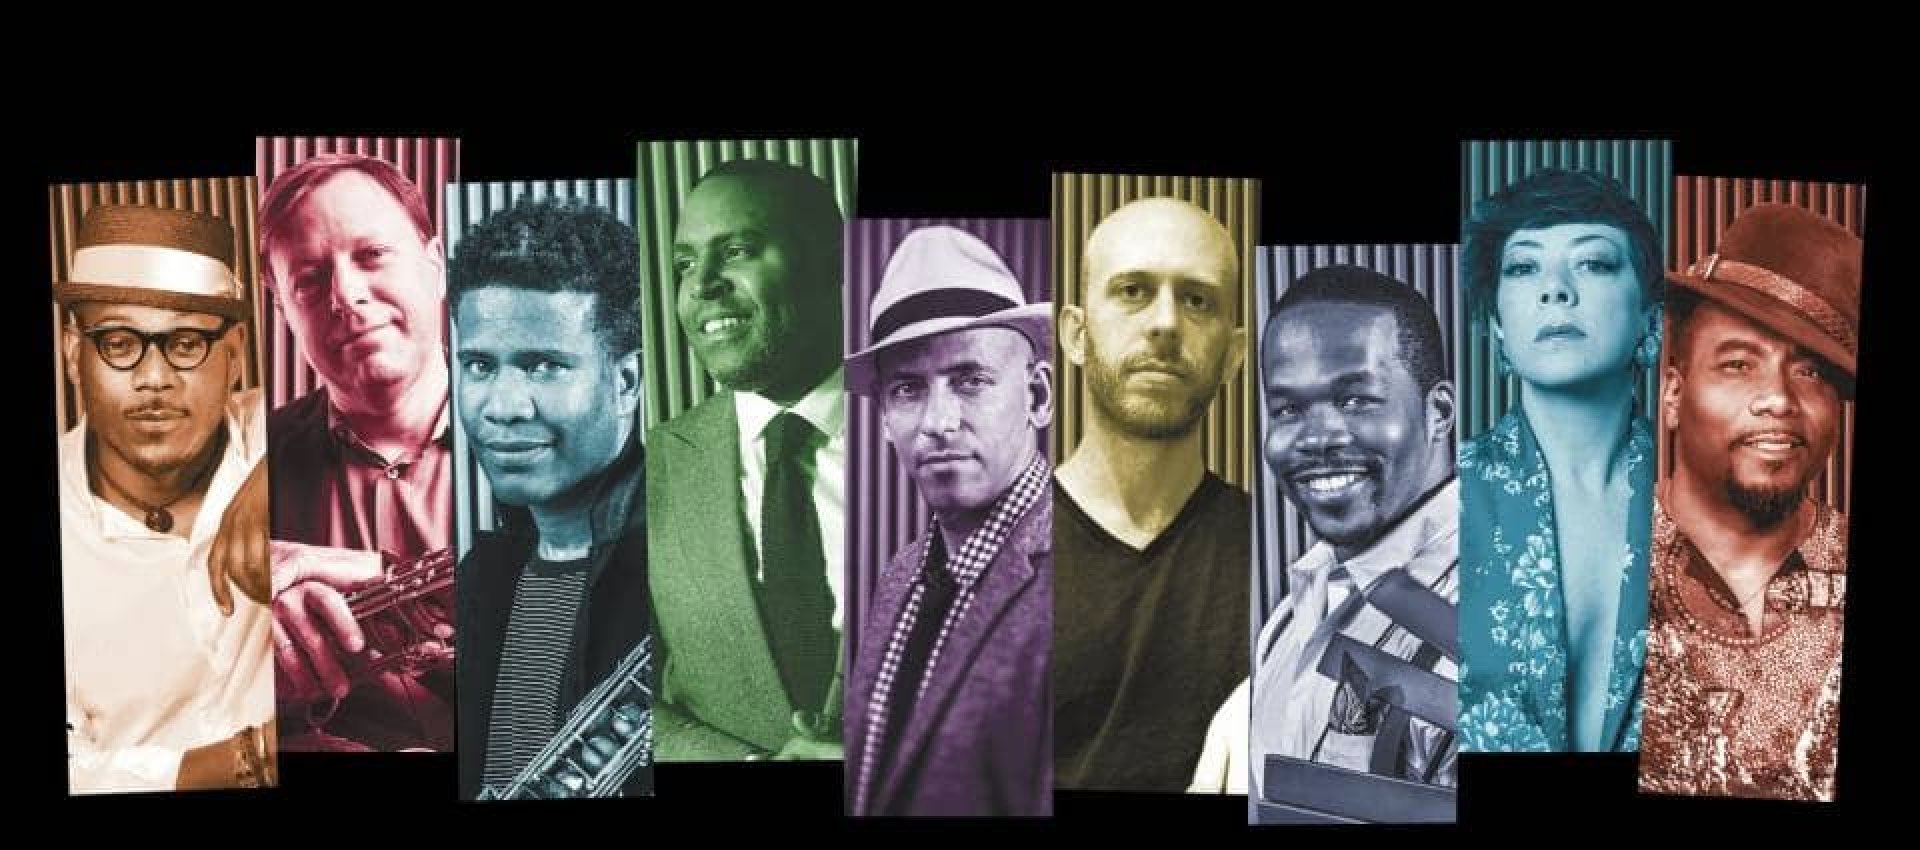 SFJAZZ Collective, New Works Reflecting the Moment